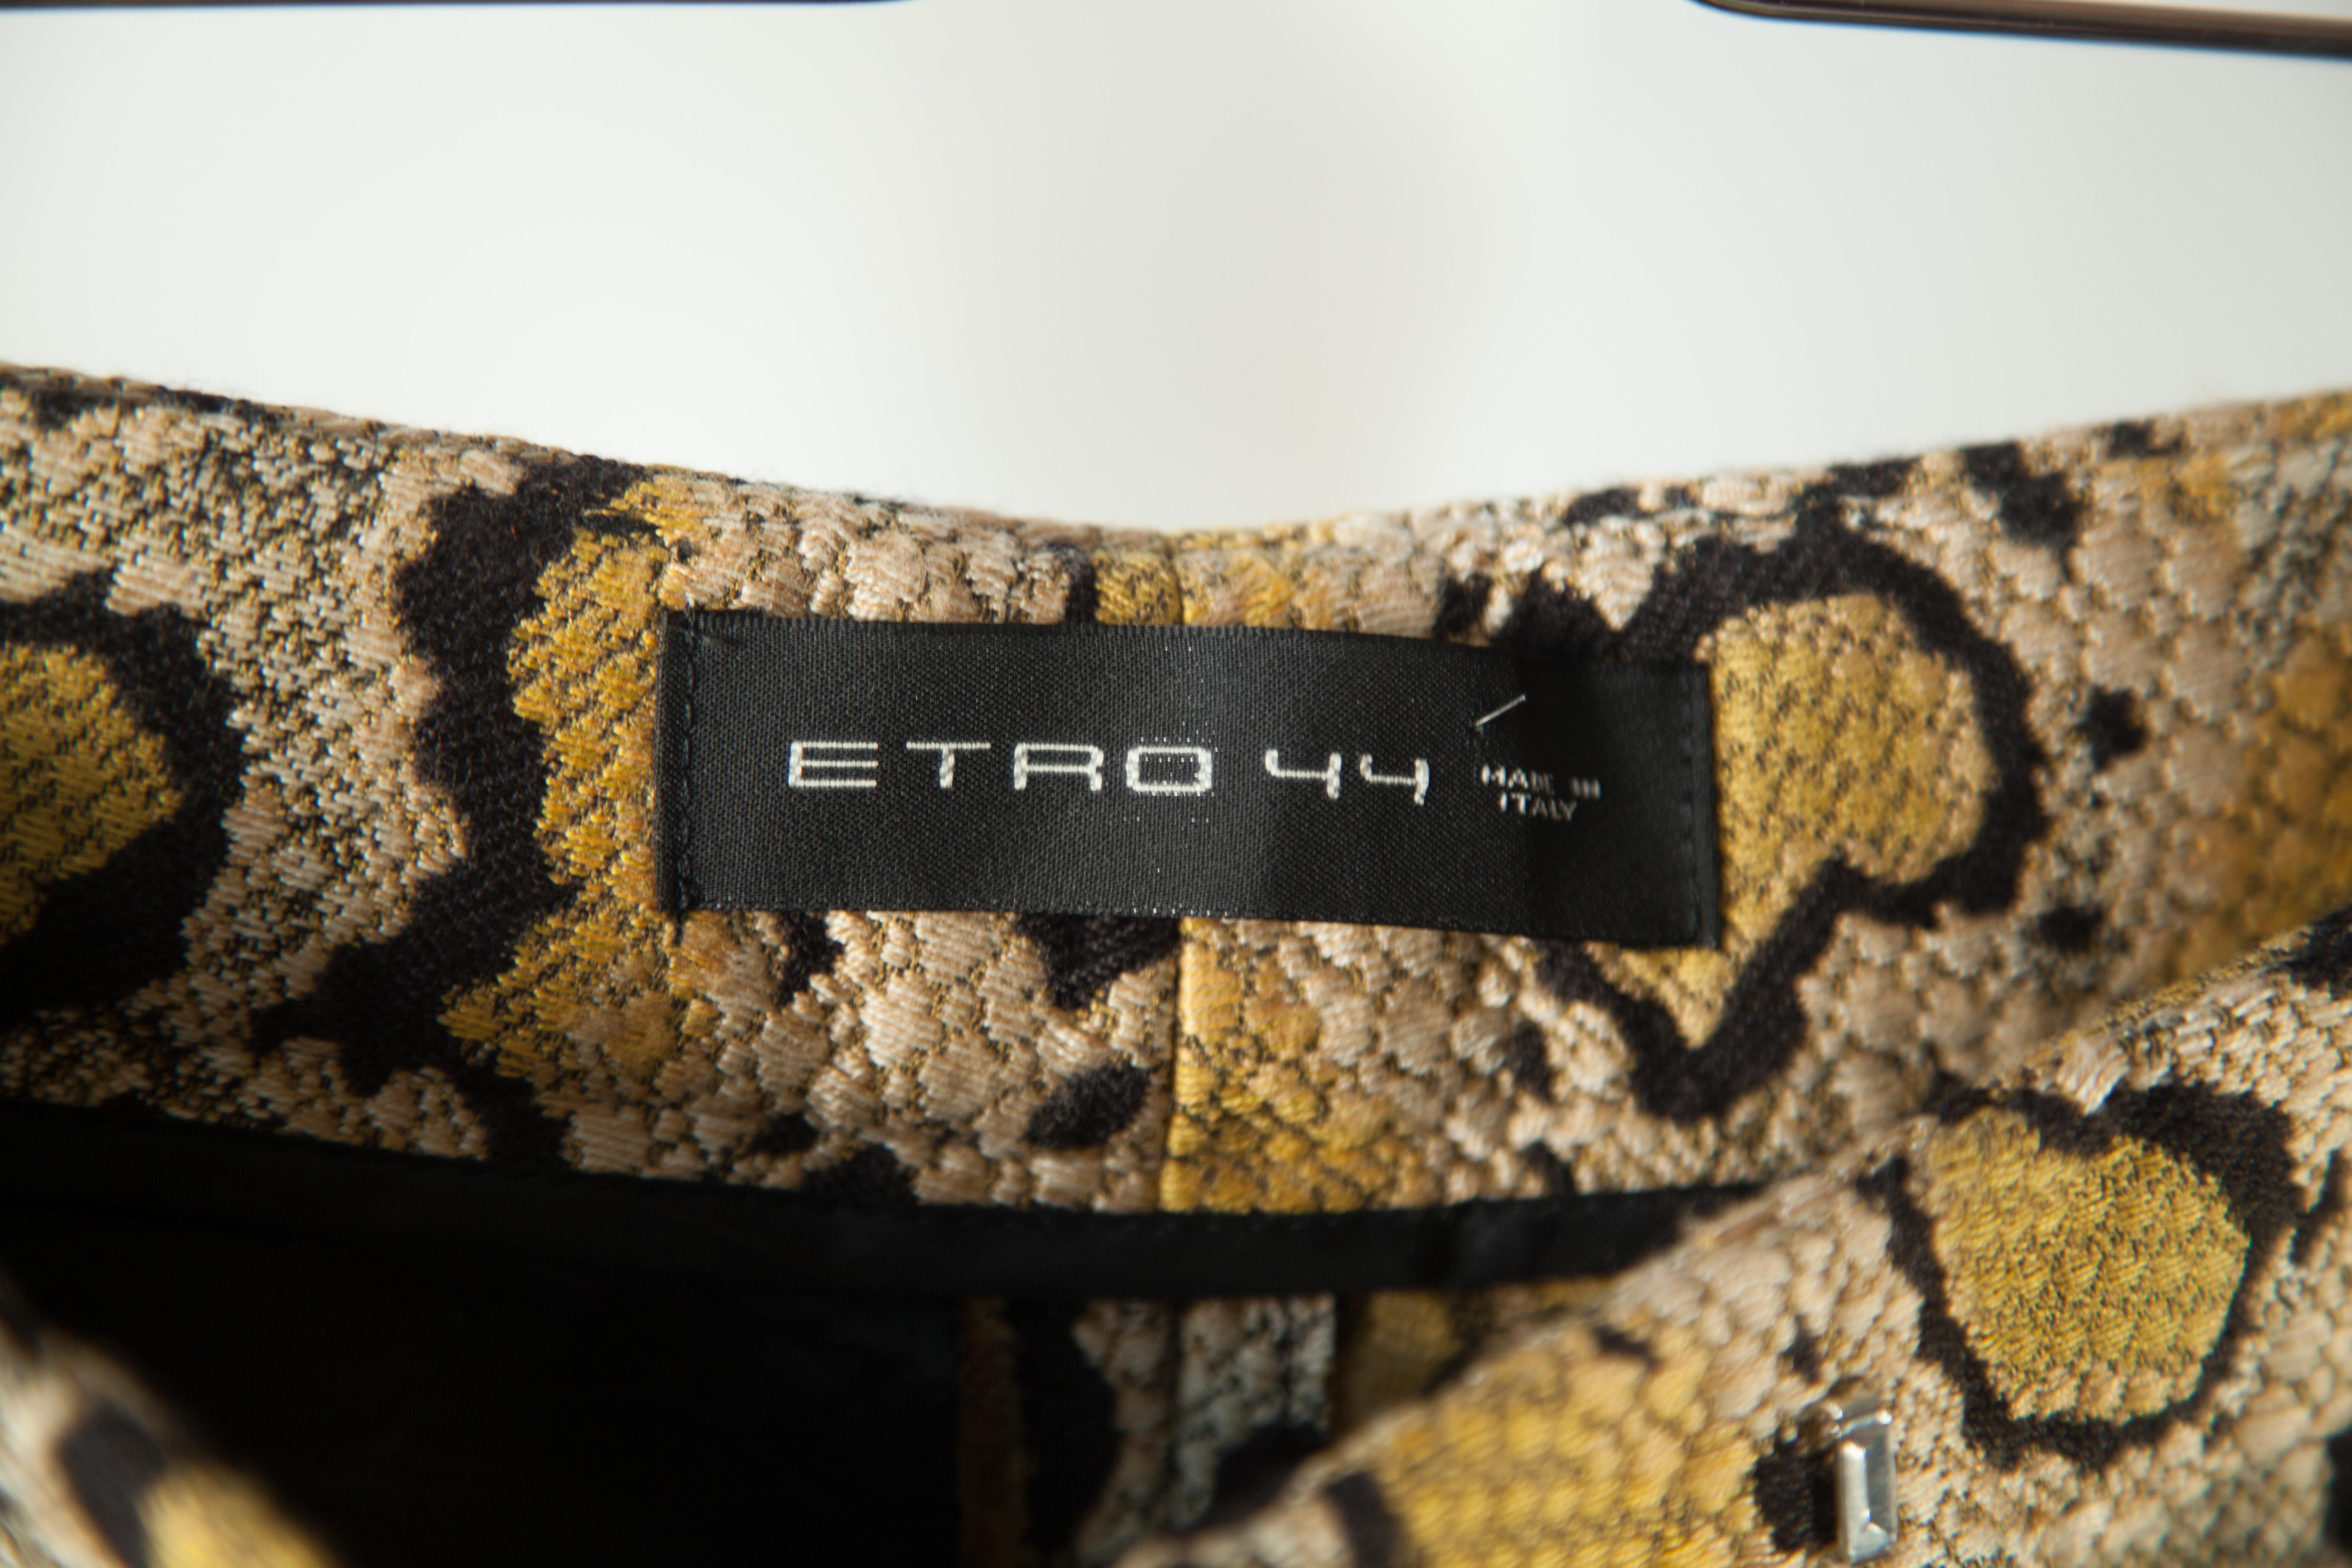 Etro Animal Print Pant In Excellent Condition For Sale In Kingston, NY